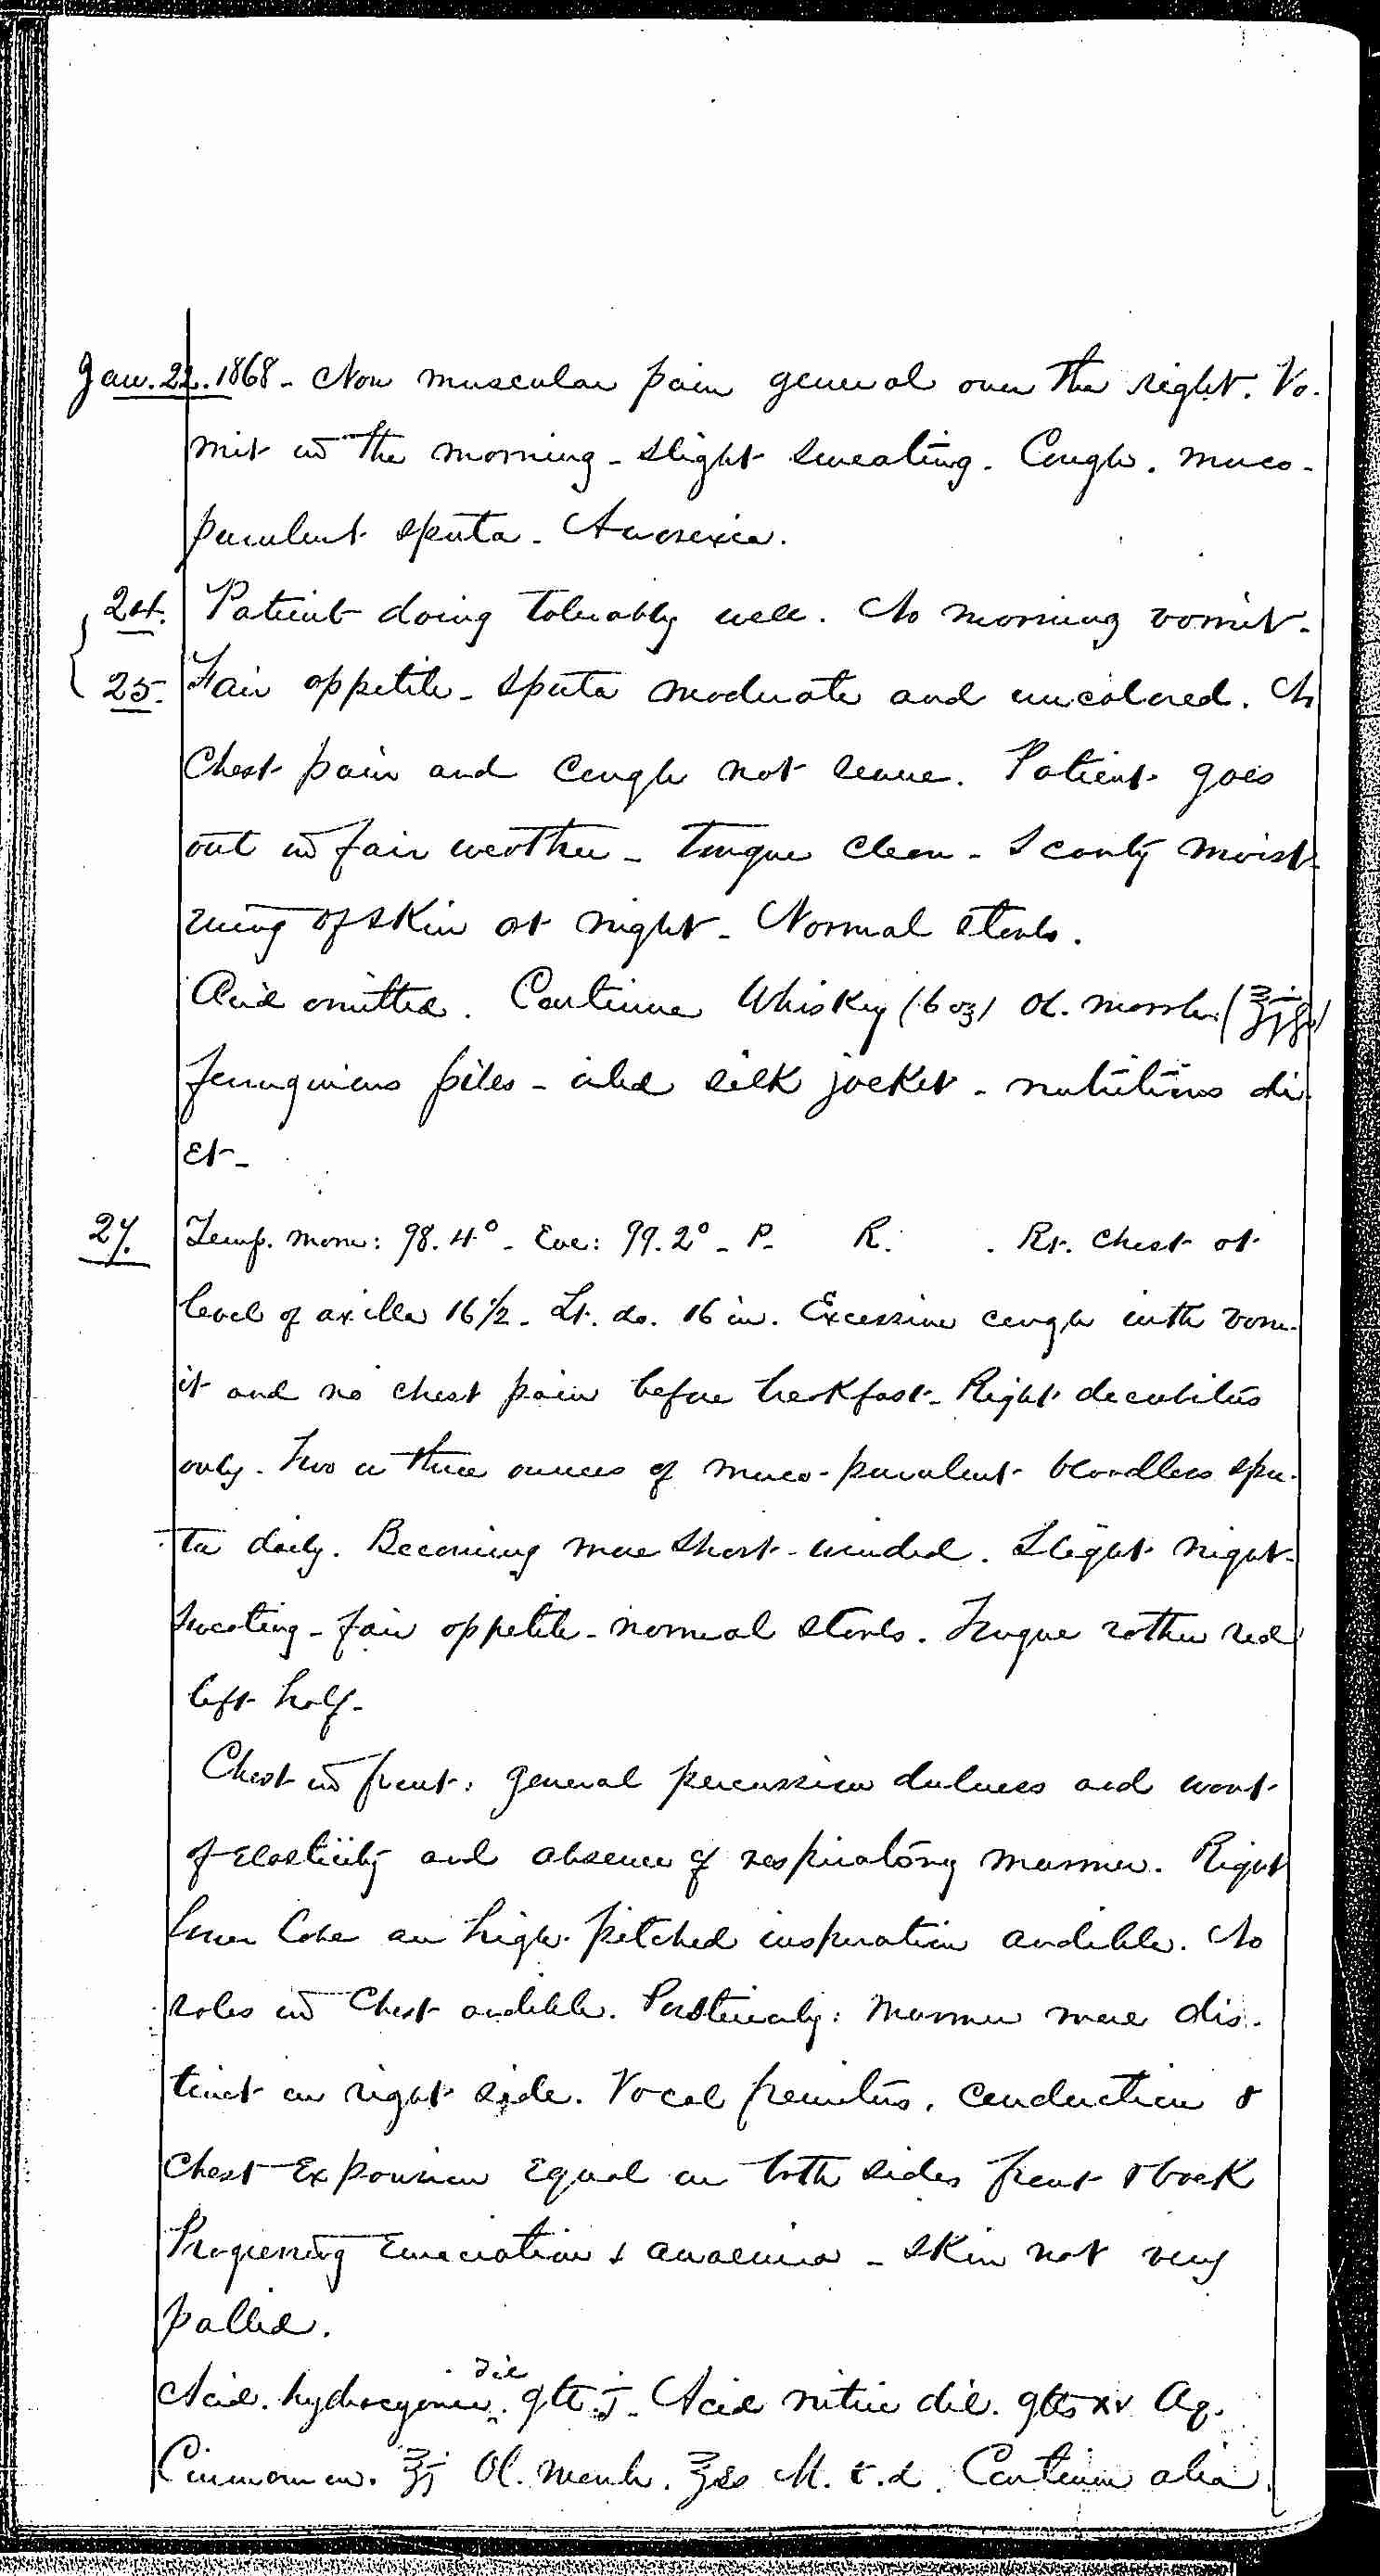 Entry for Hugh Riley (page 22 of 31) in the log Hospital Tickets and Case Papers - Naval Hospital - Washington, D.C. - 1868-69